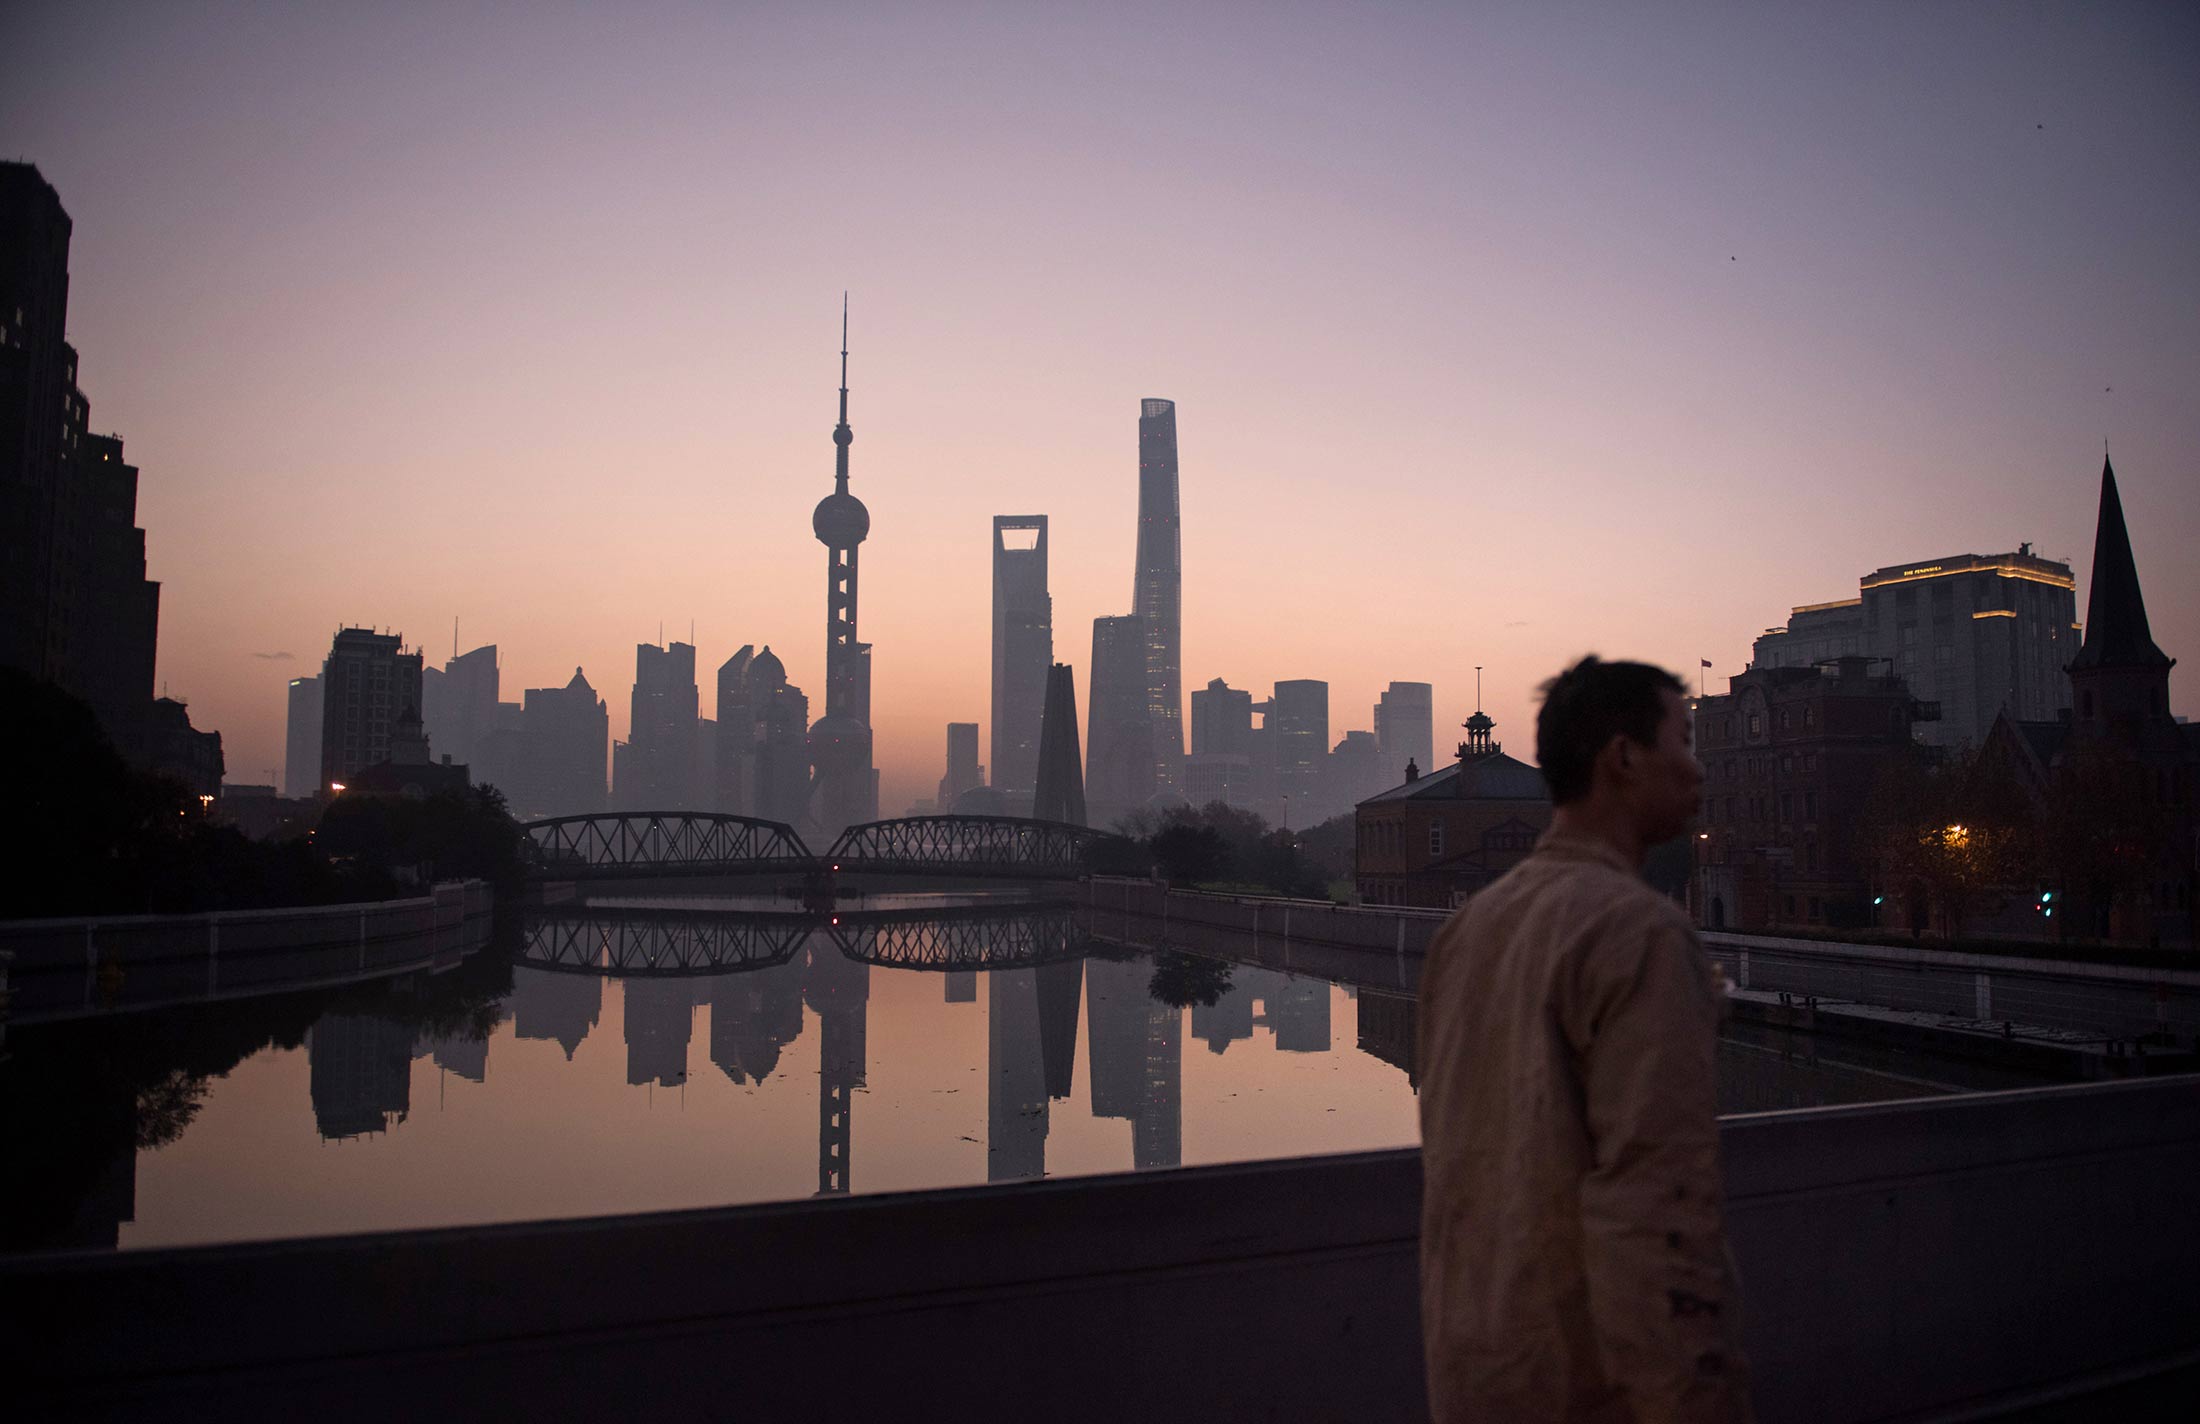 A man walks over a bridge in front of the skyline of the Lujiazui Financial District in Pudong in Shanghai at dawn on Dec. 1, 2015.
